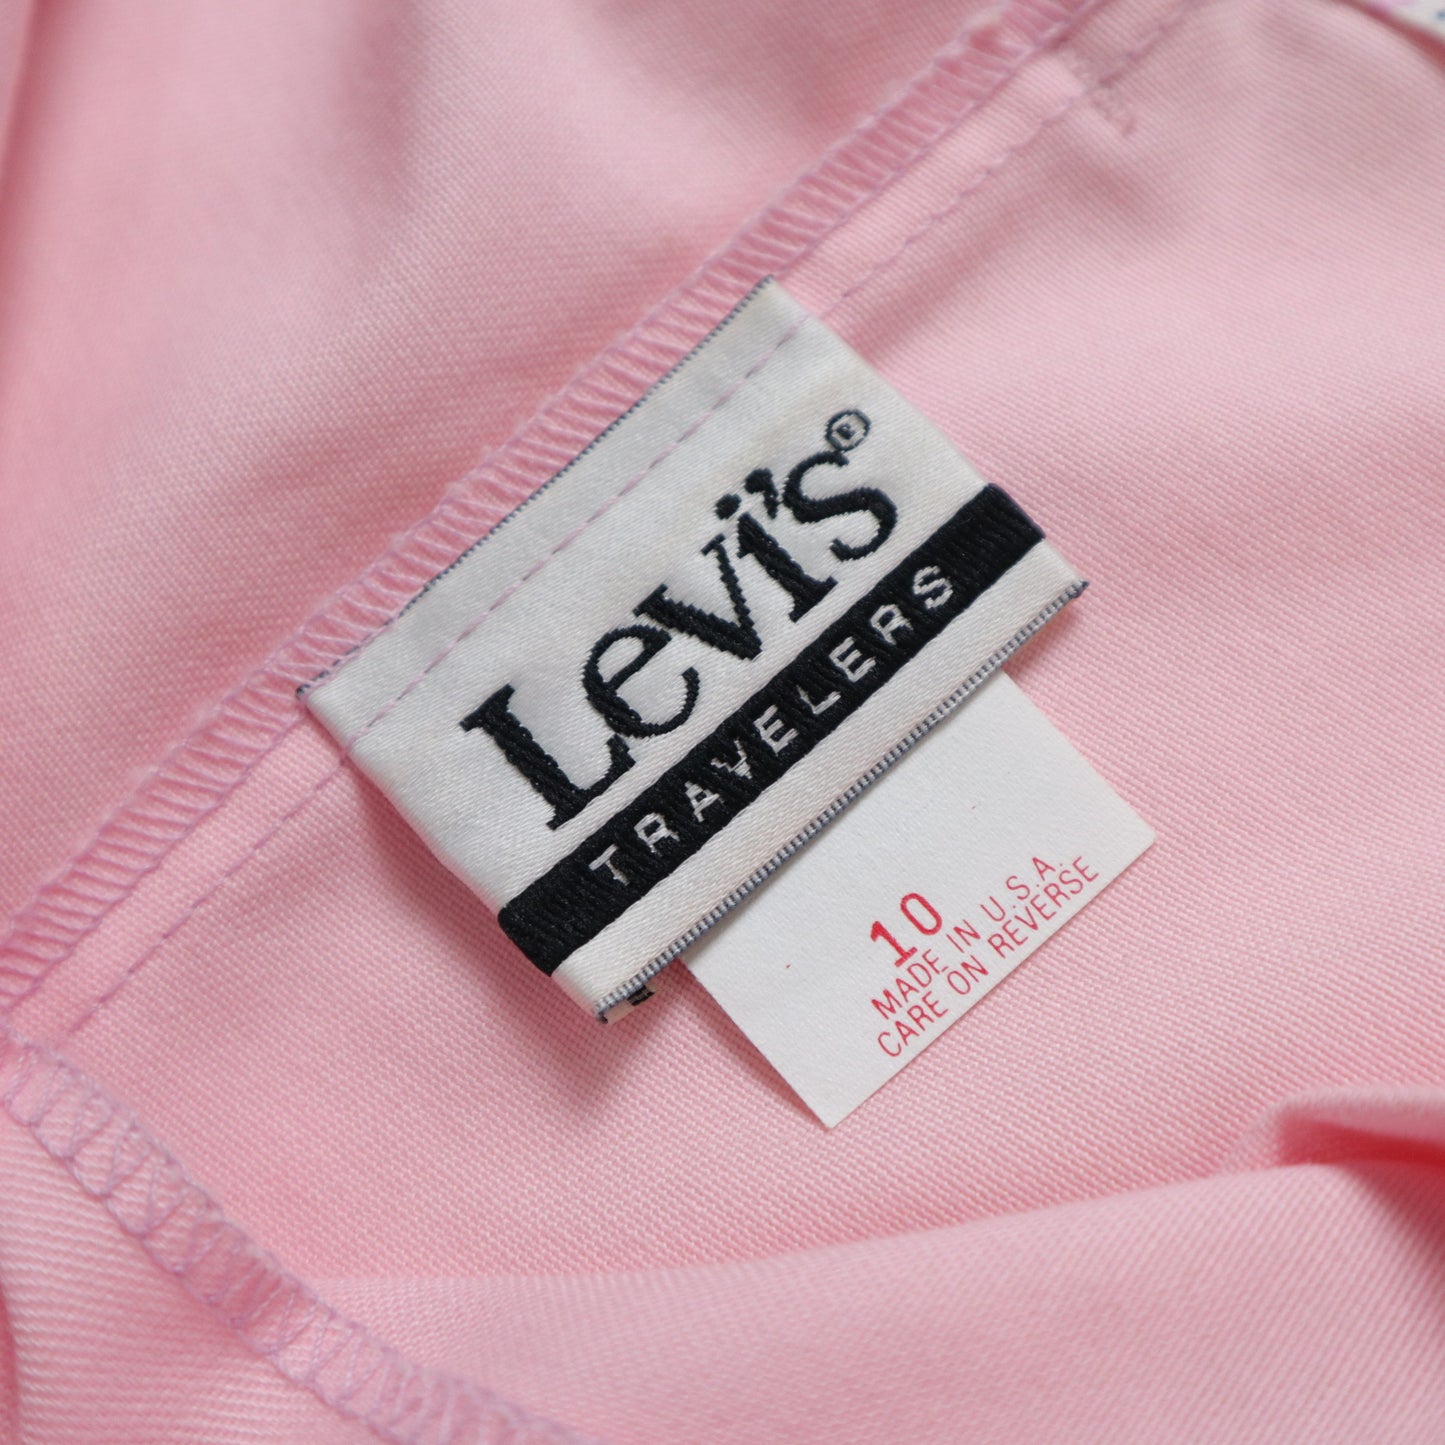 1980s Levi's American-made pink plain discount shorts